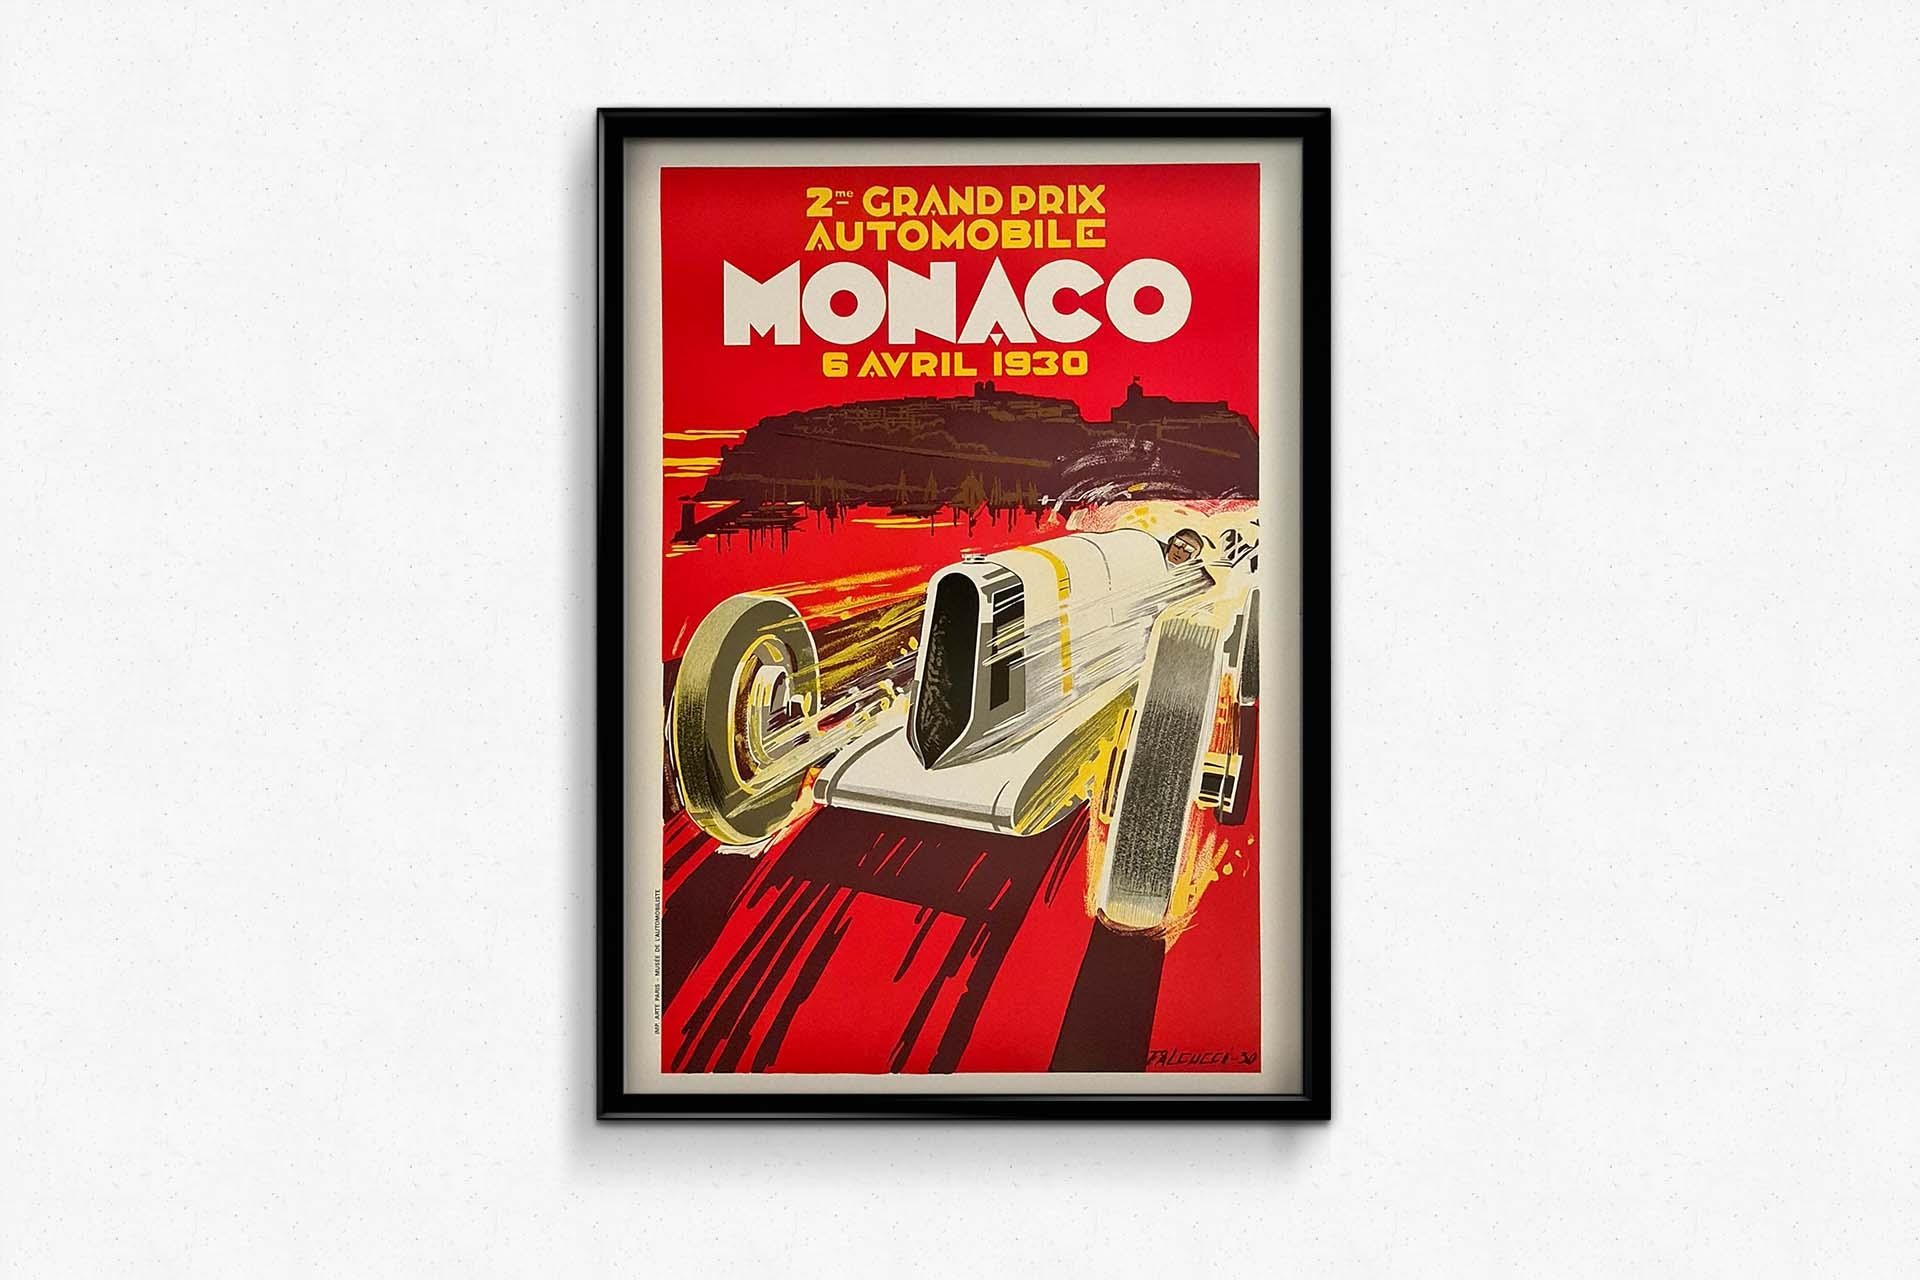 Robert Falcucci 🇫🇷 (1900 - 1989) was a French painter, illustrator, poster artist and decorator. He worked for the car manufacturer #Renault from 1923 to 1927, creating many advertising pages in magazines, including for #Omnia and #Automobilia.
In